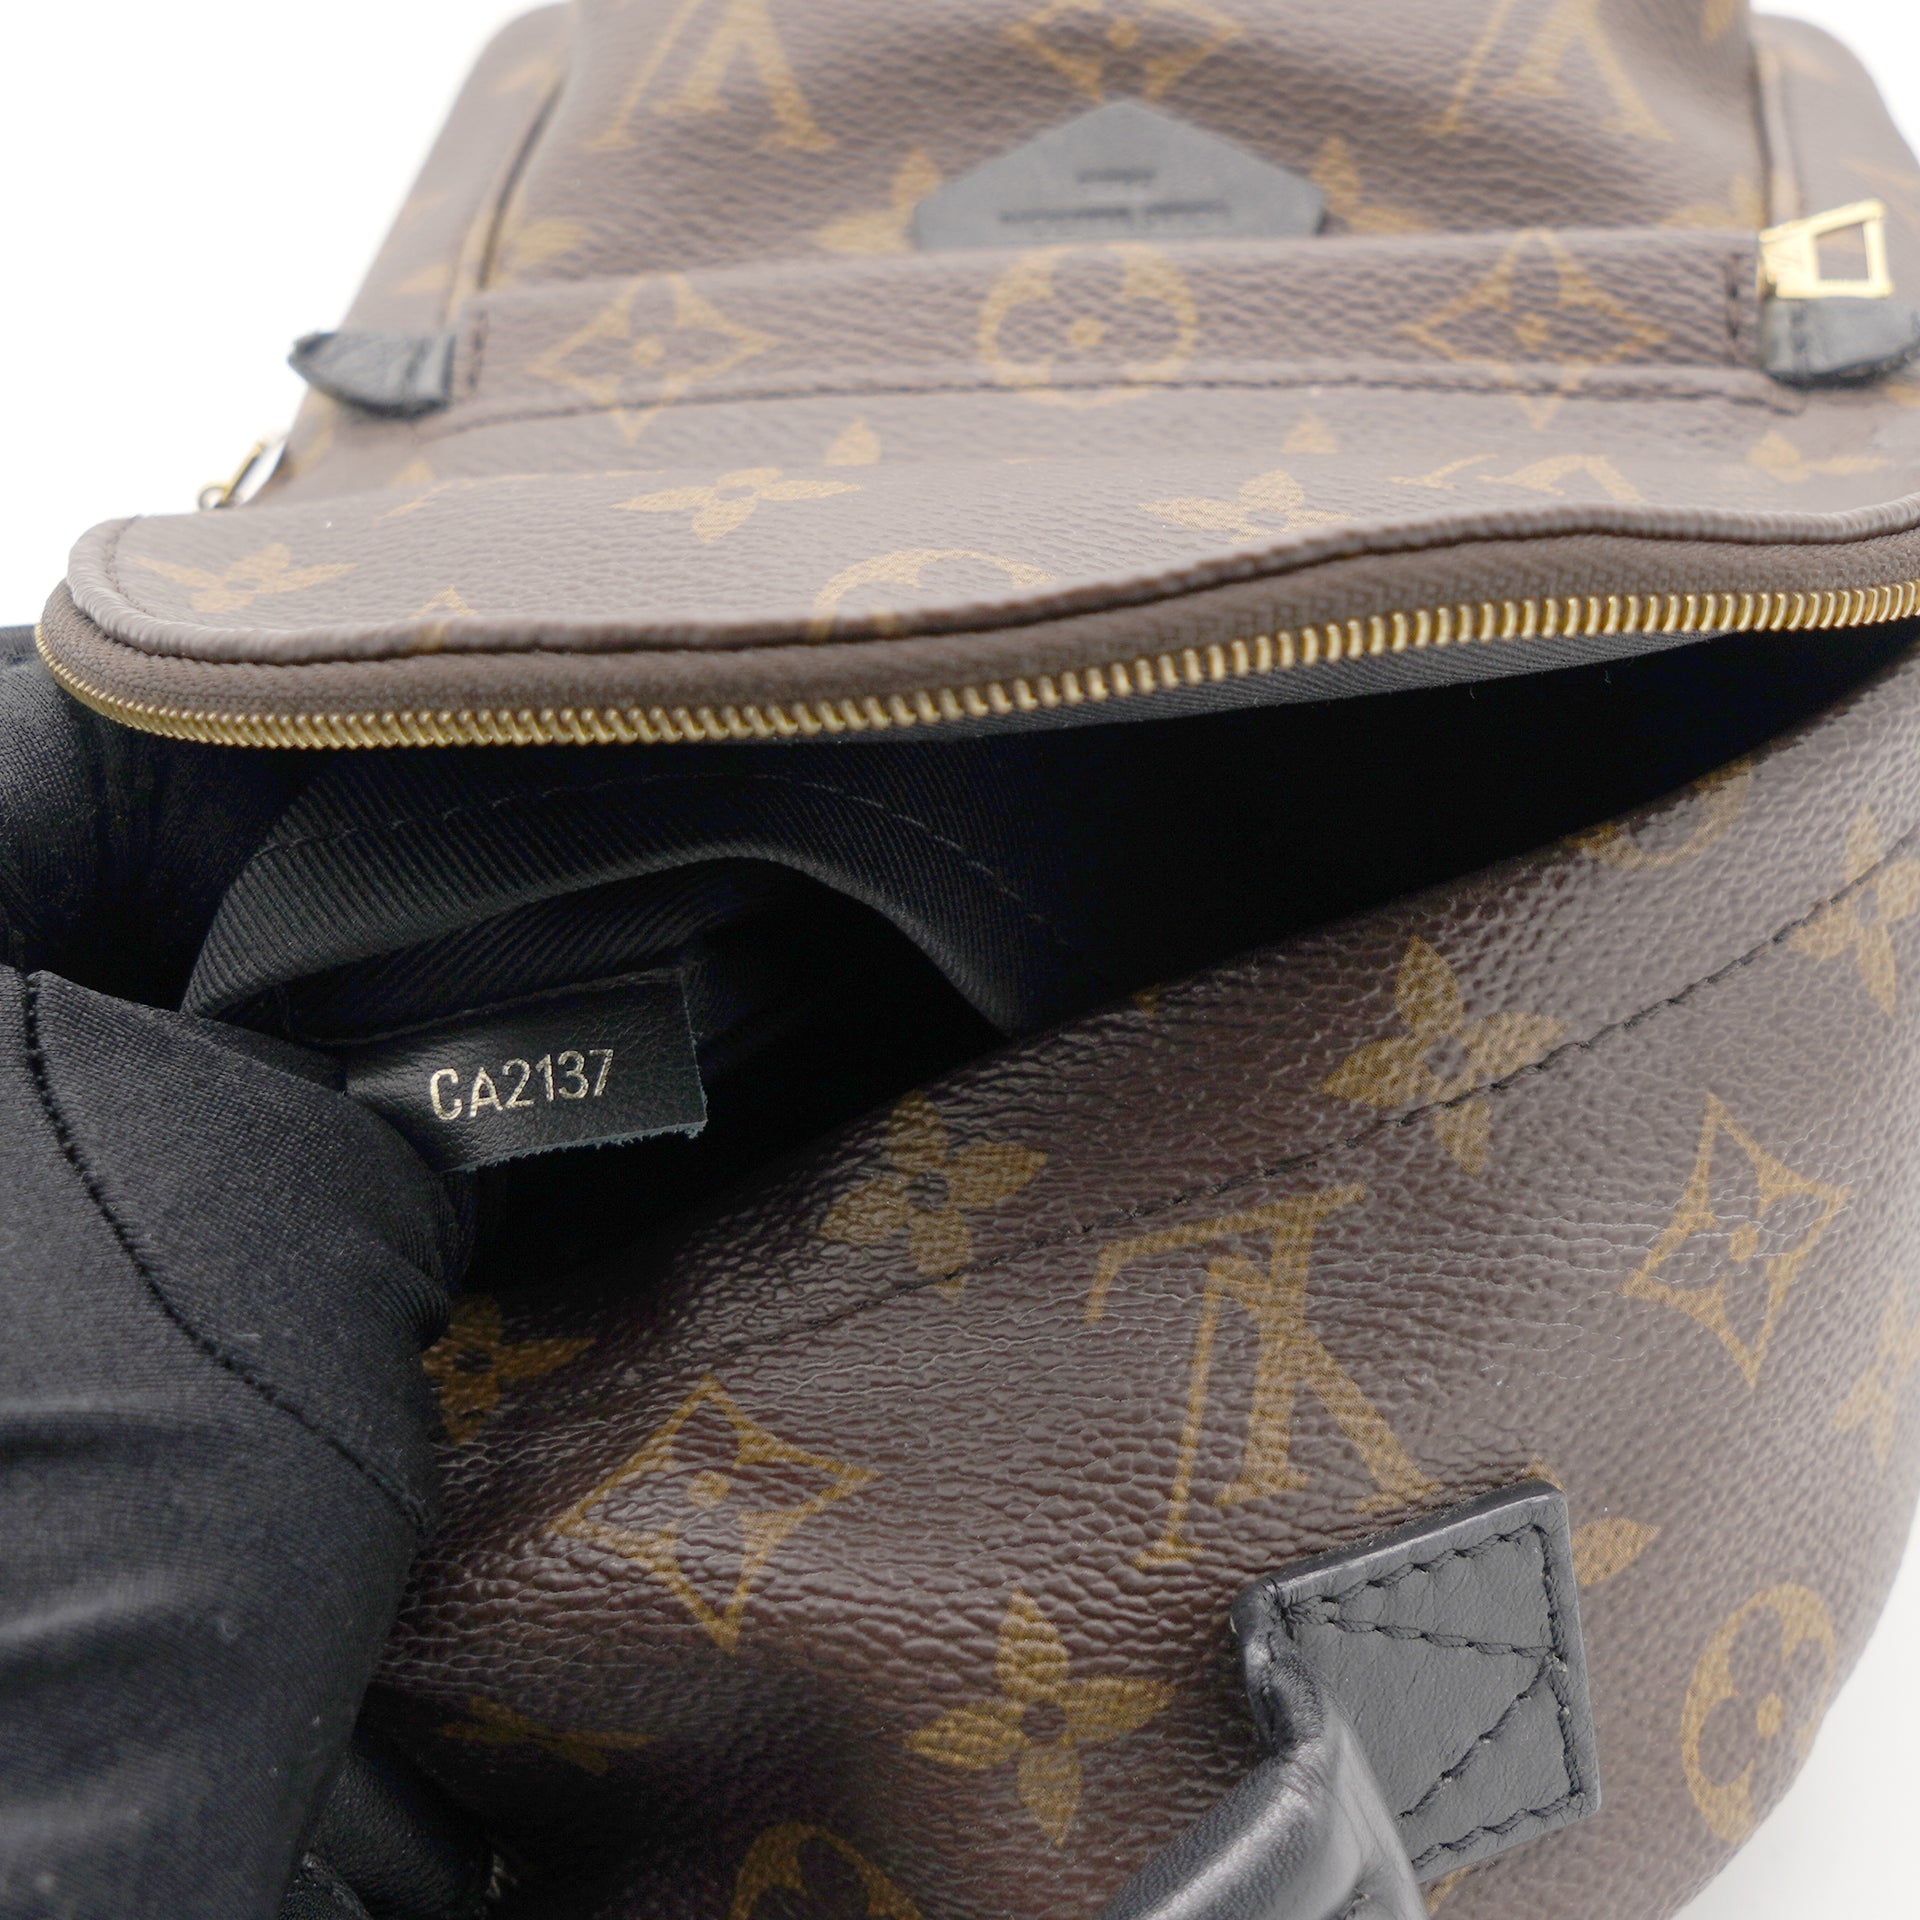 A Closer Look: Louis Vuitton Palm Springs Backpack